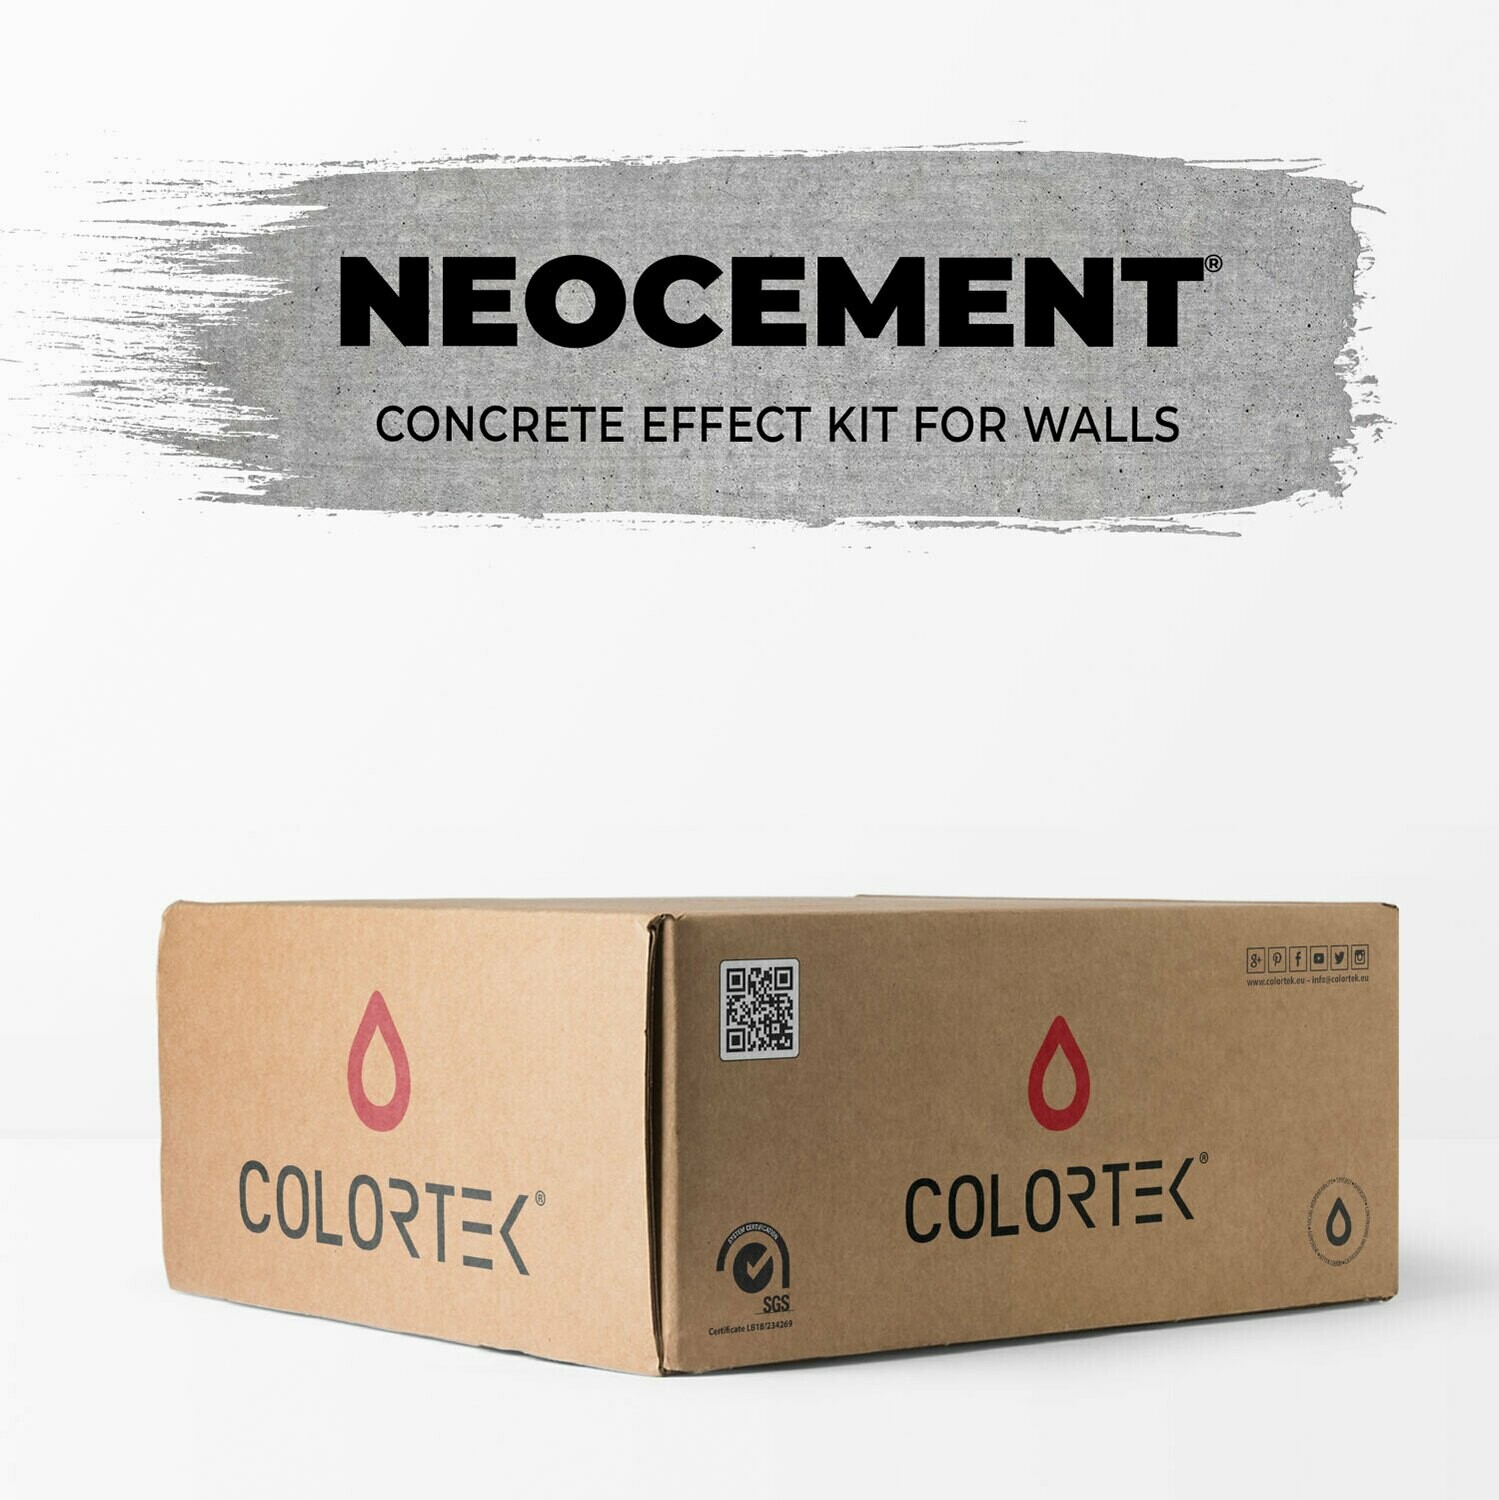 Neocement - Concrete Effect Kit for Walls 4 sqm